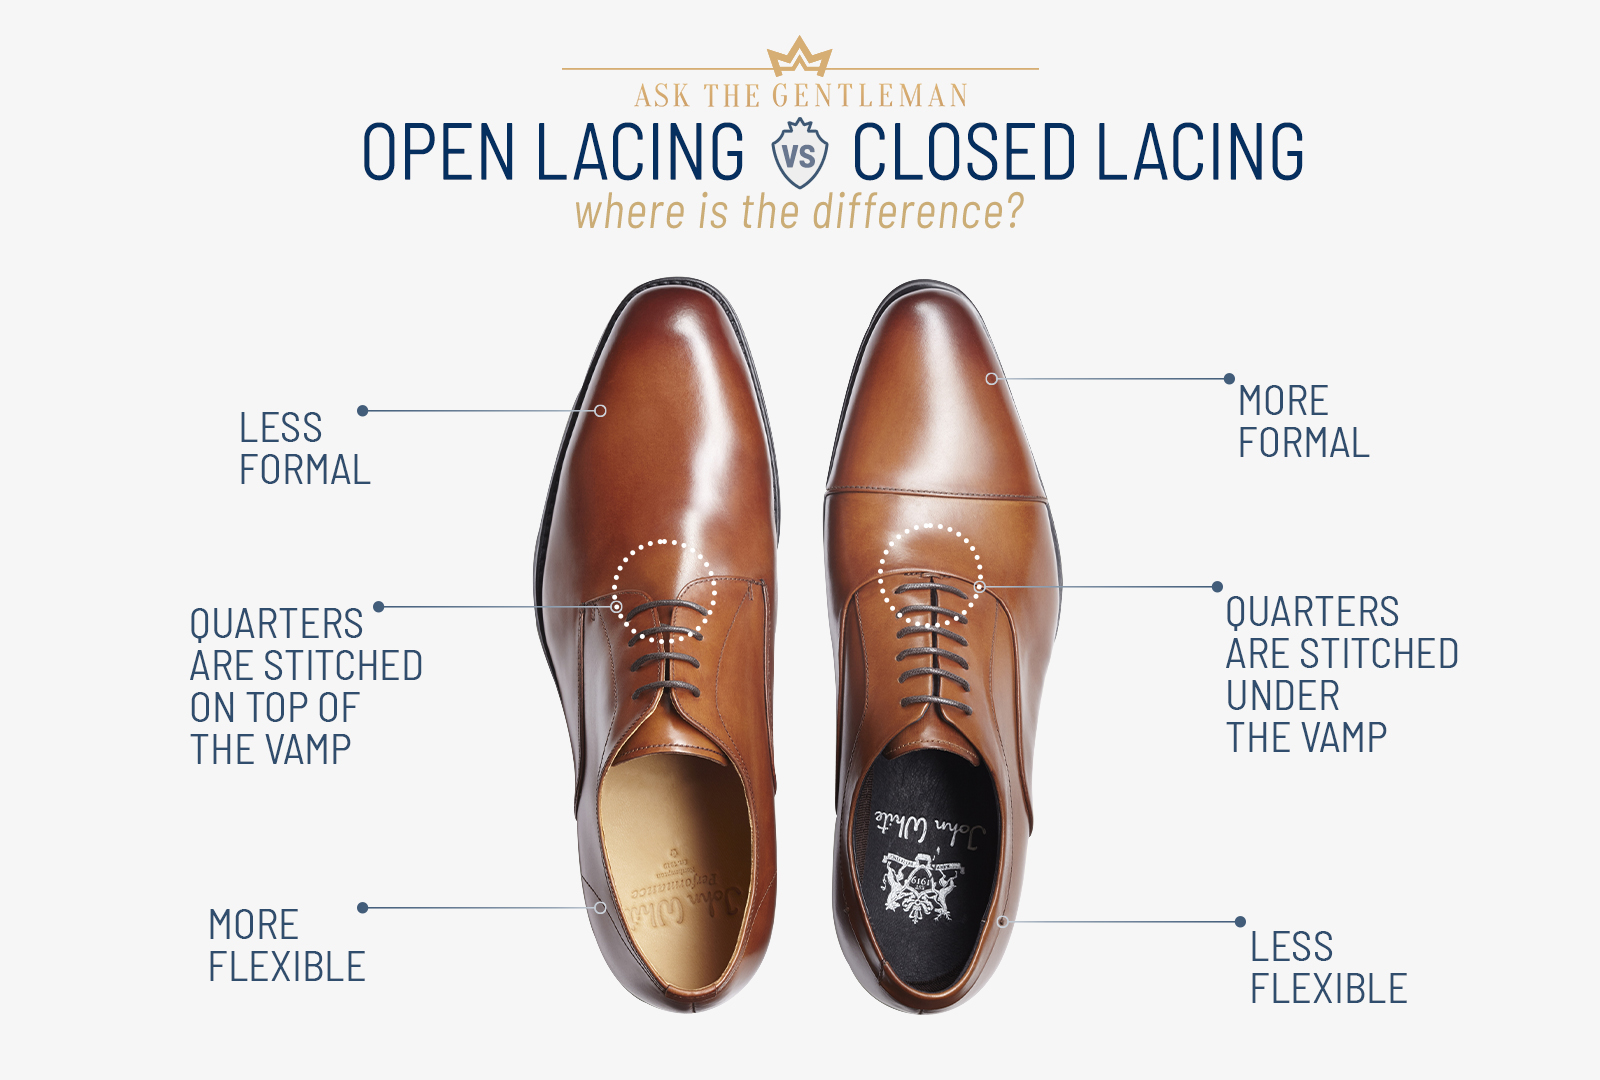 Open lacing vs. closed lacing dress shoe system